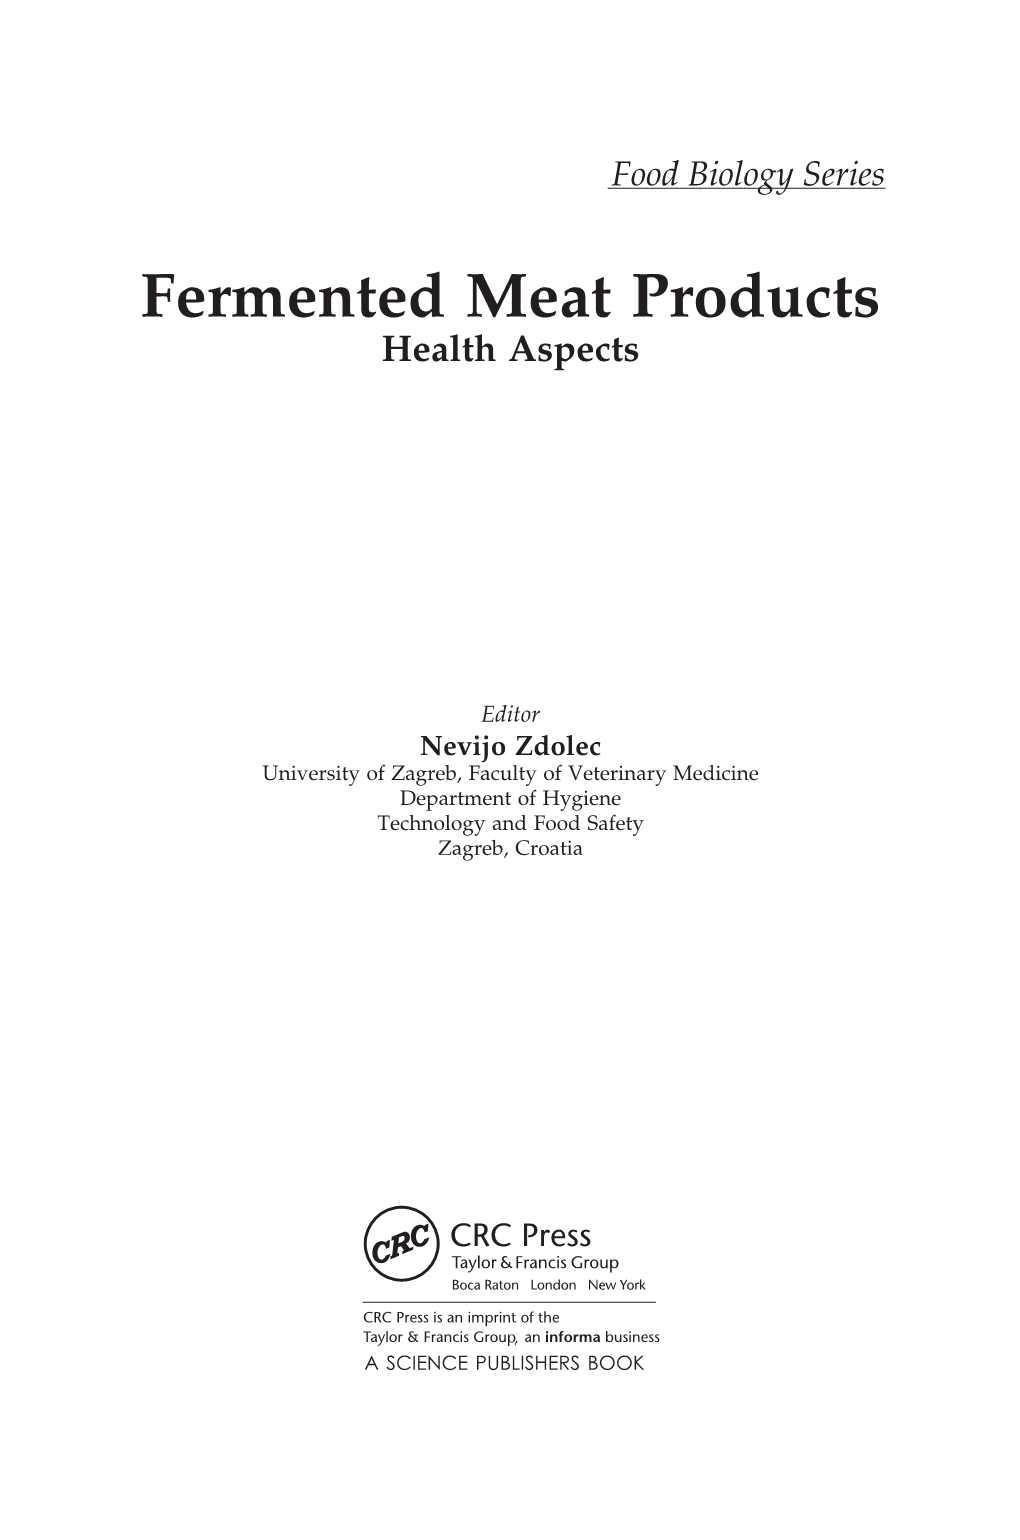 Fermented Meat Products Health Aspects